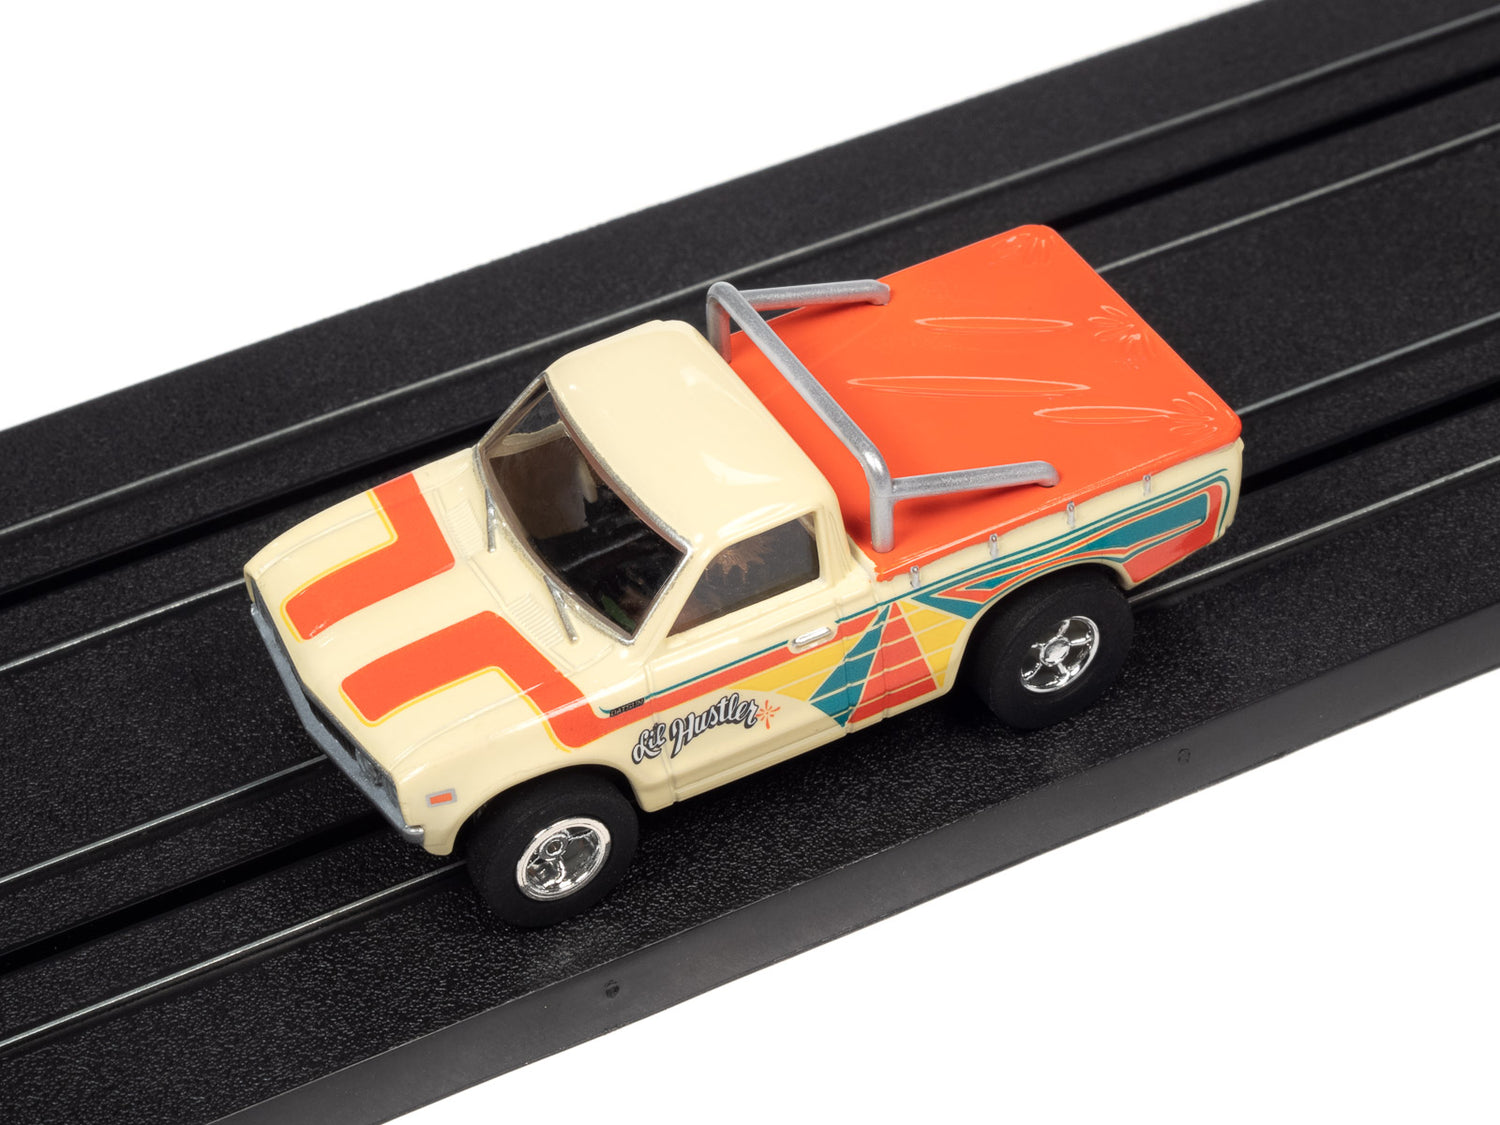 Auto World Xtraction 1975 Datsun 620 Pickup (AW Exclusive) Slot Car HO Scale